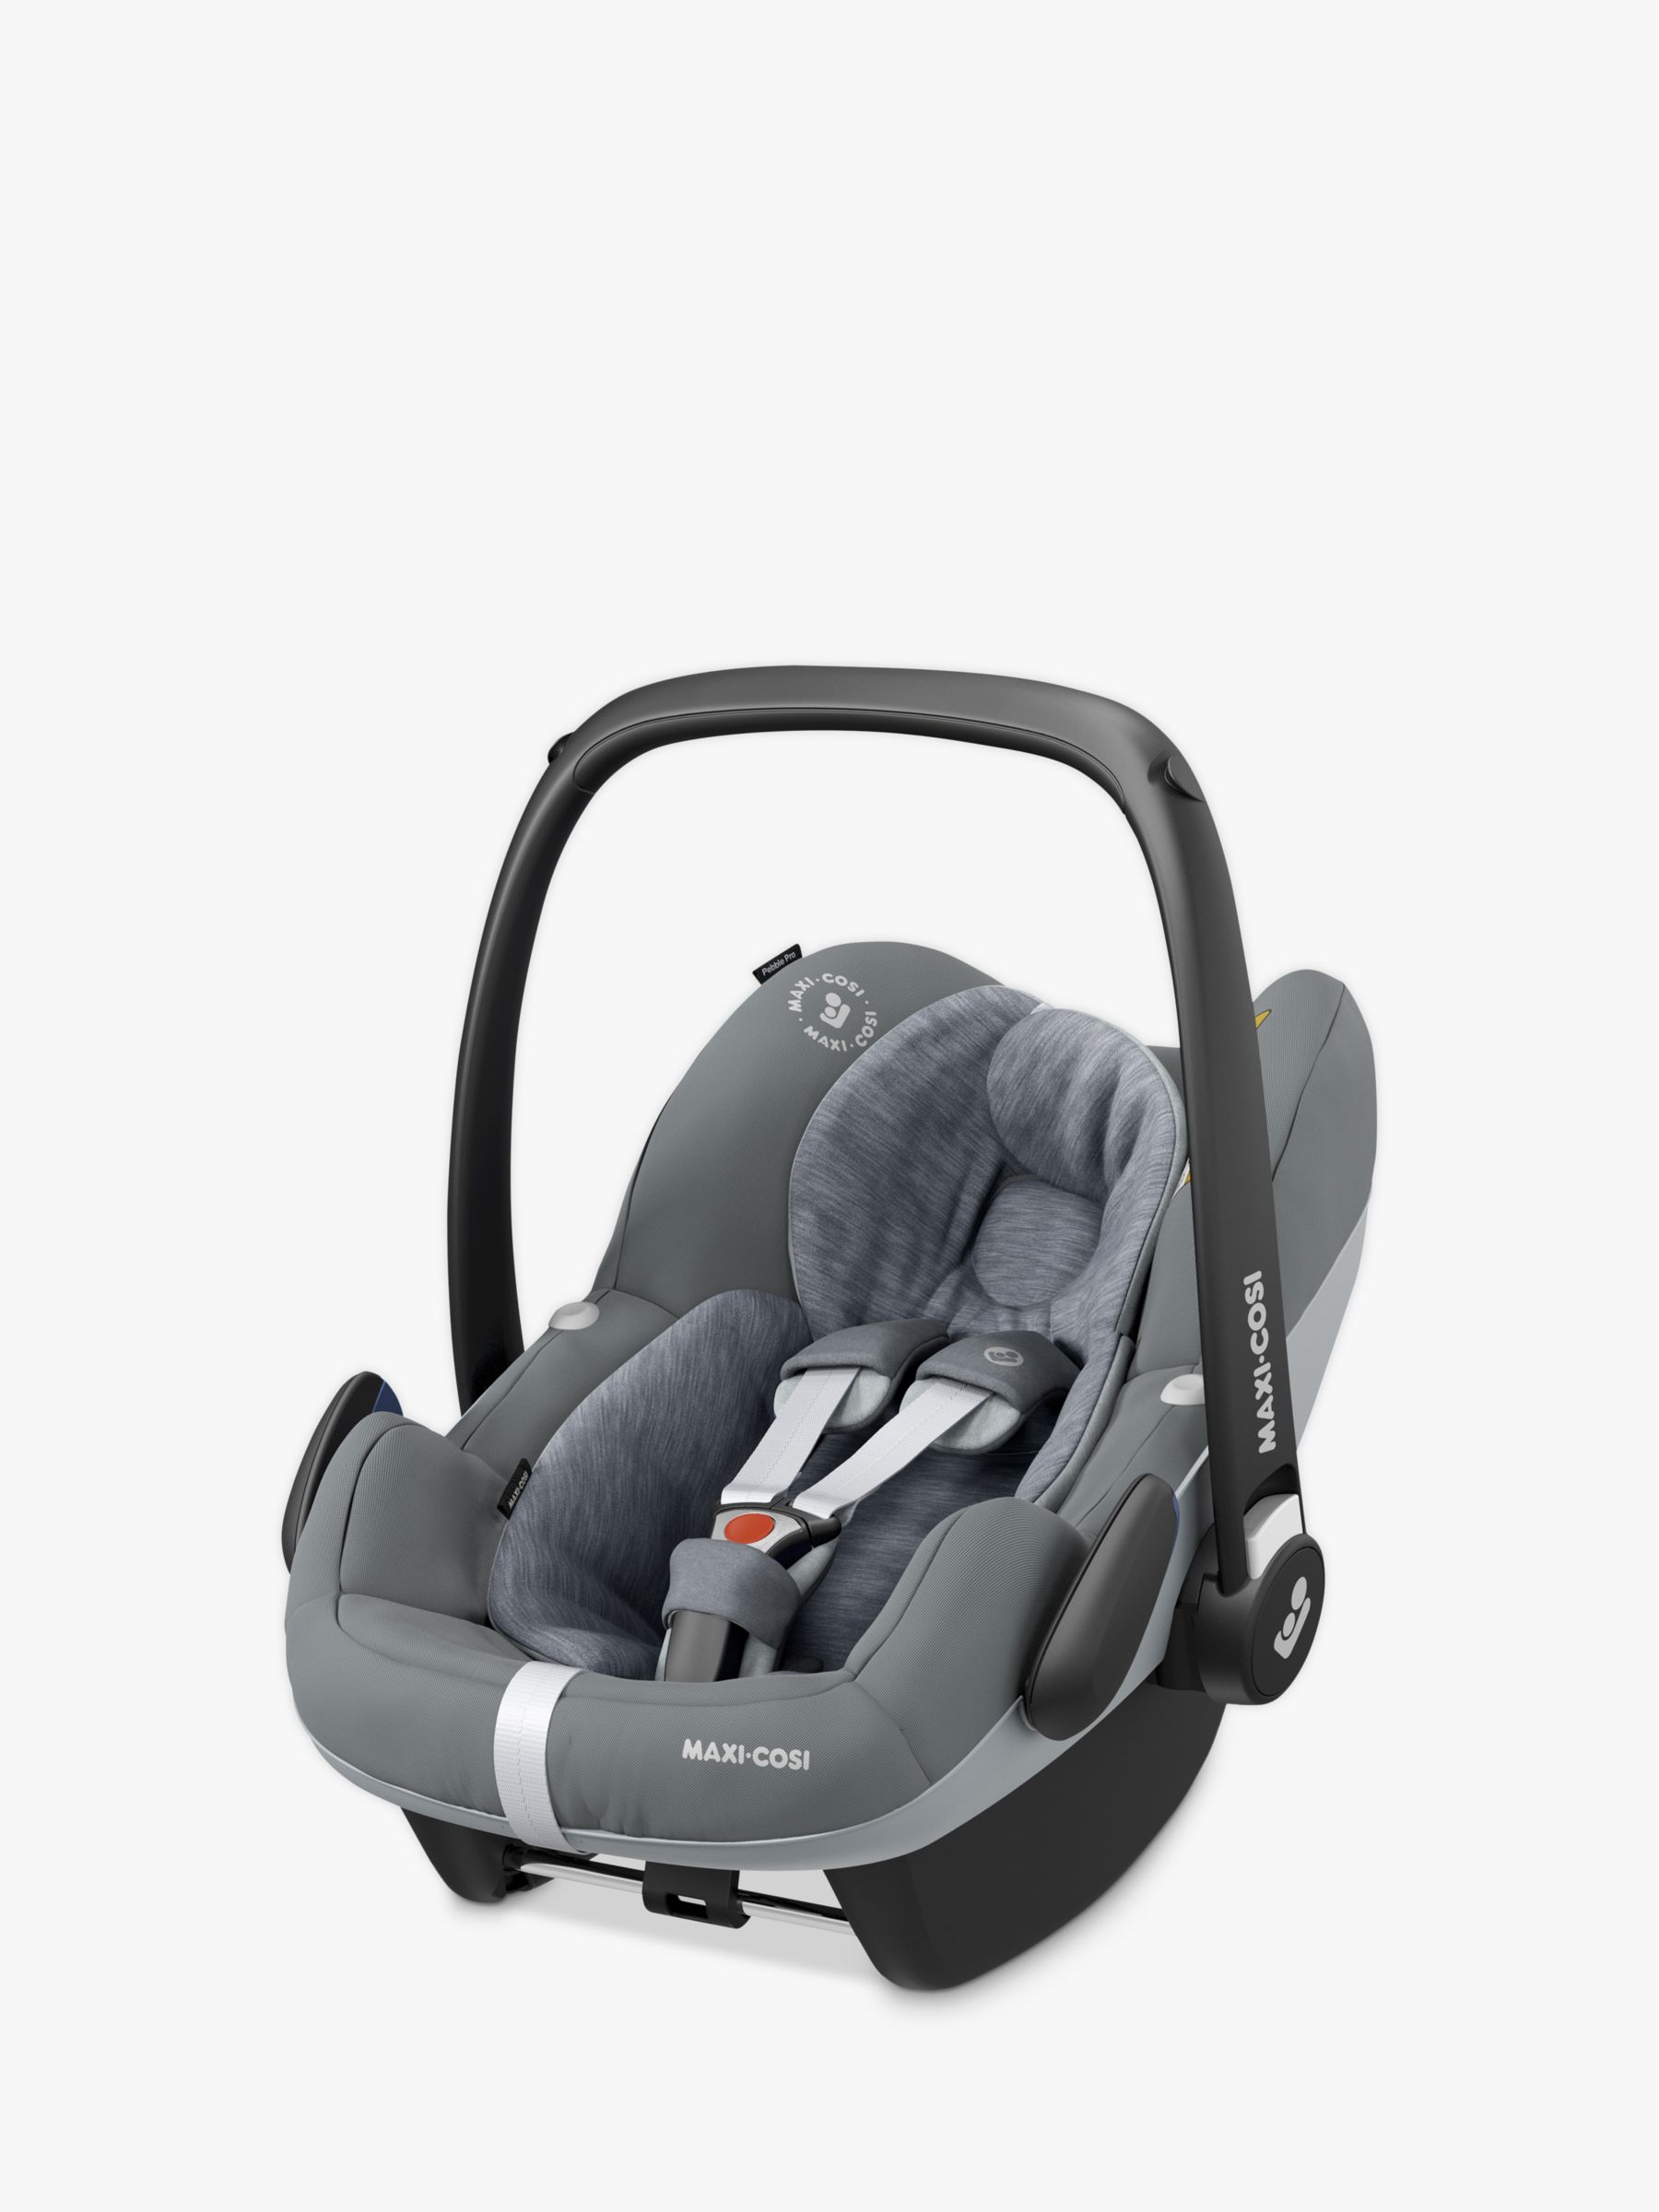 Picasso Pracht Versnel Baby Maxi-Cosi Car Seats | John Lewis & Partners